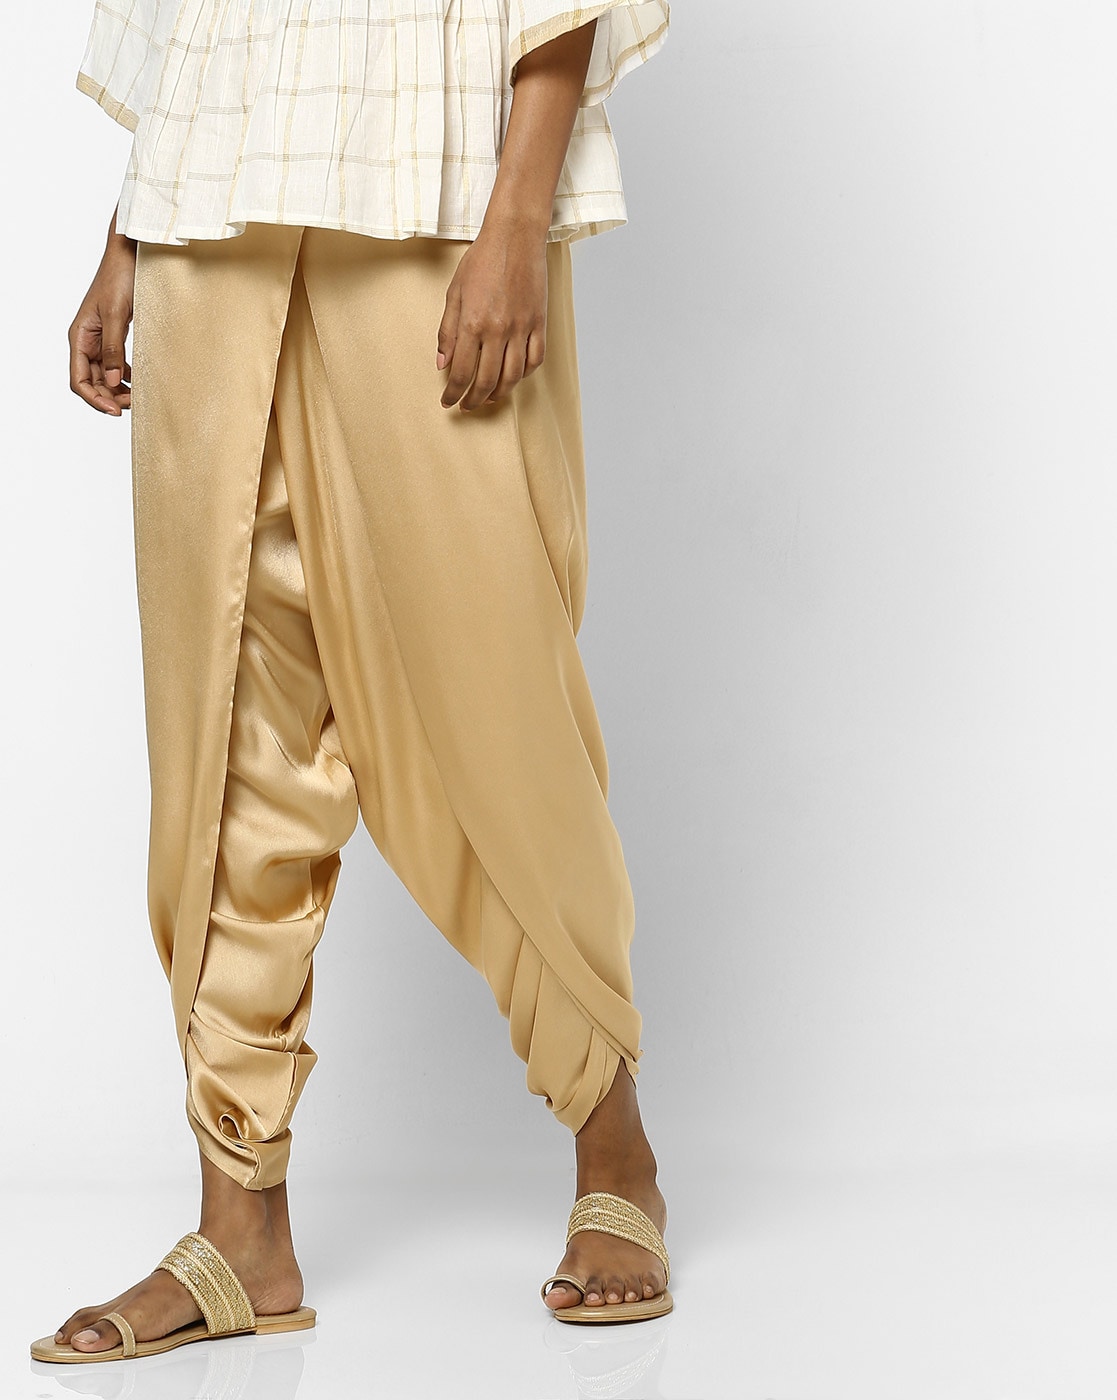 Solid Color Georgette Shimmer Dhoti in Golden : BUC103